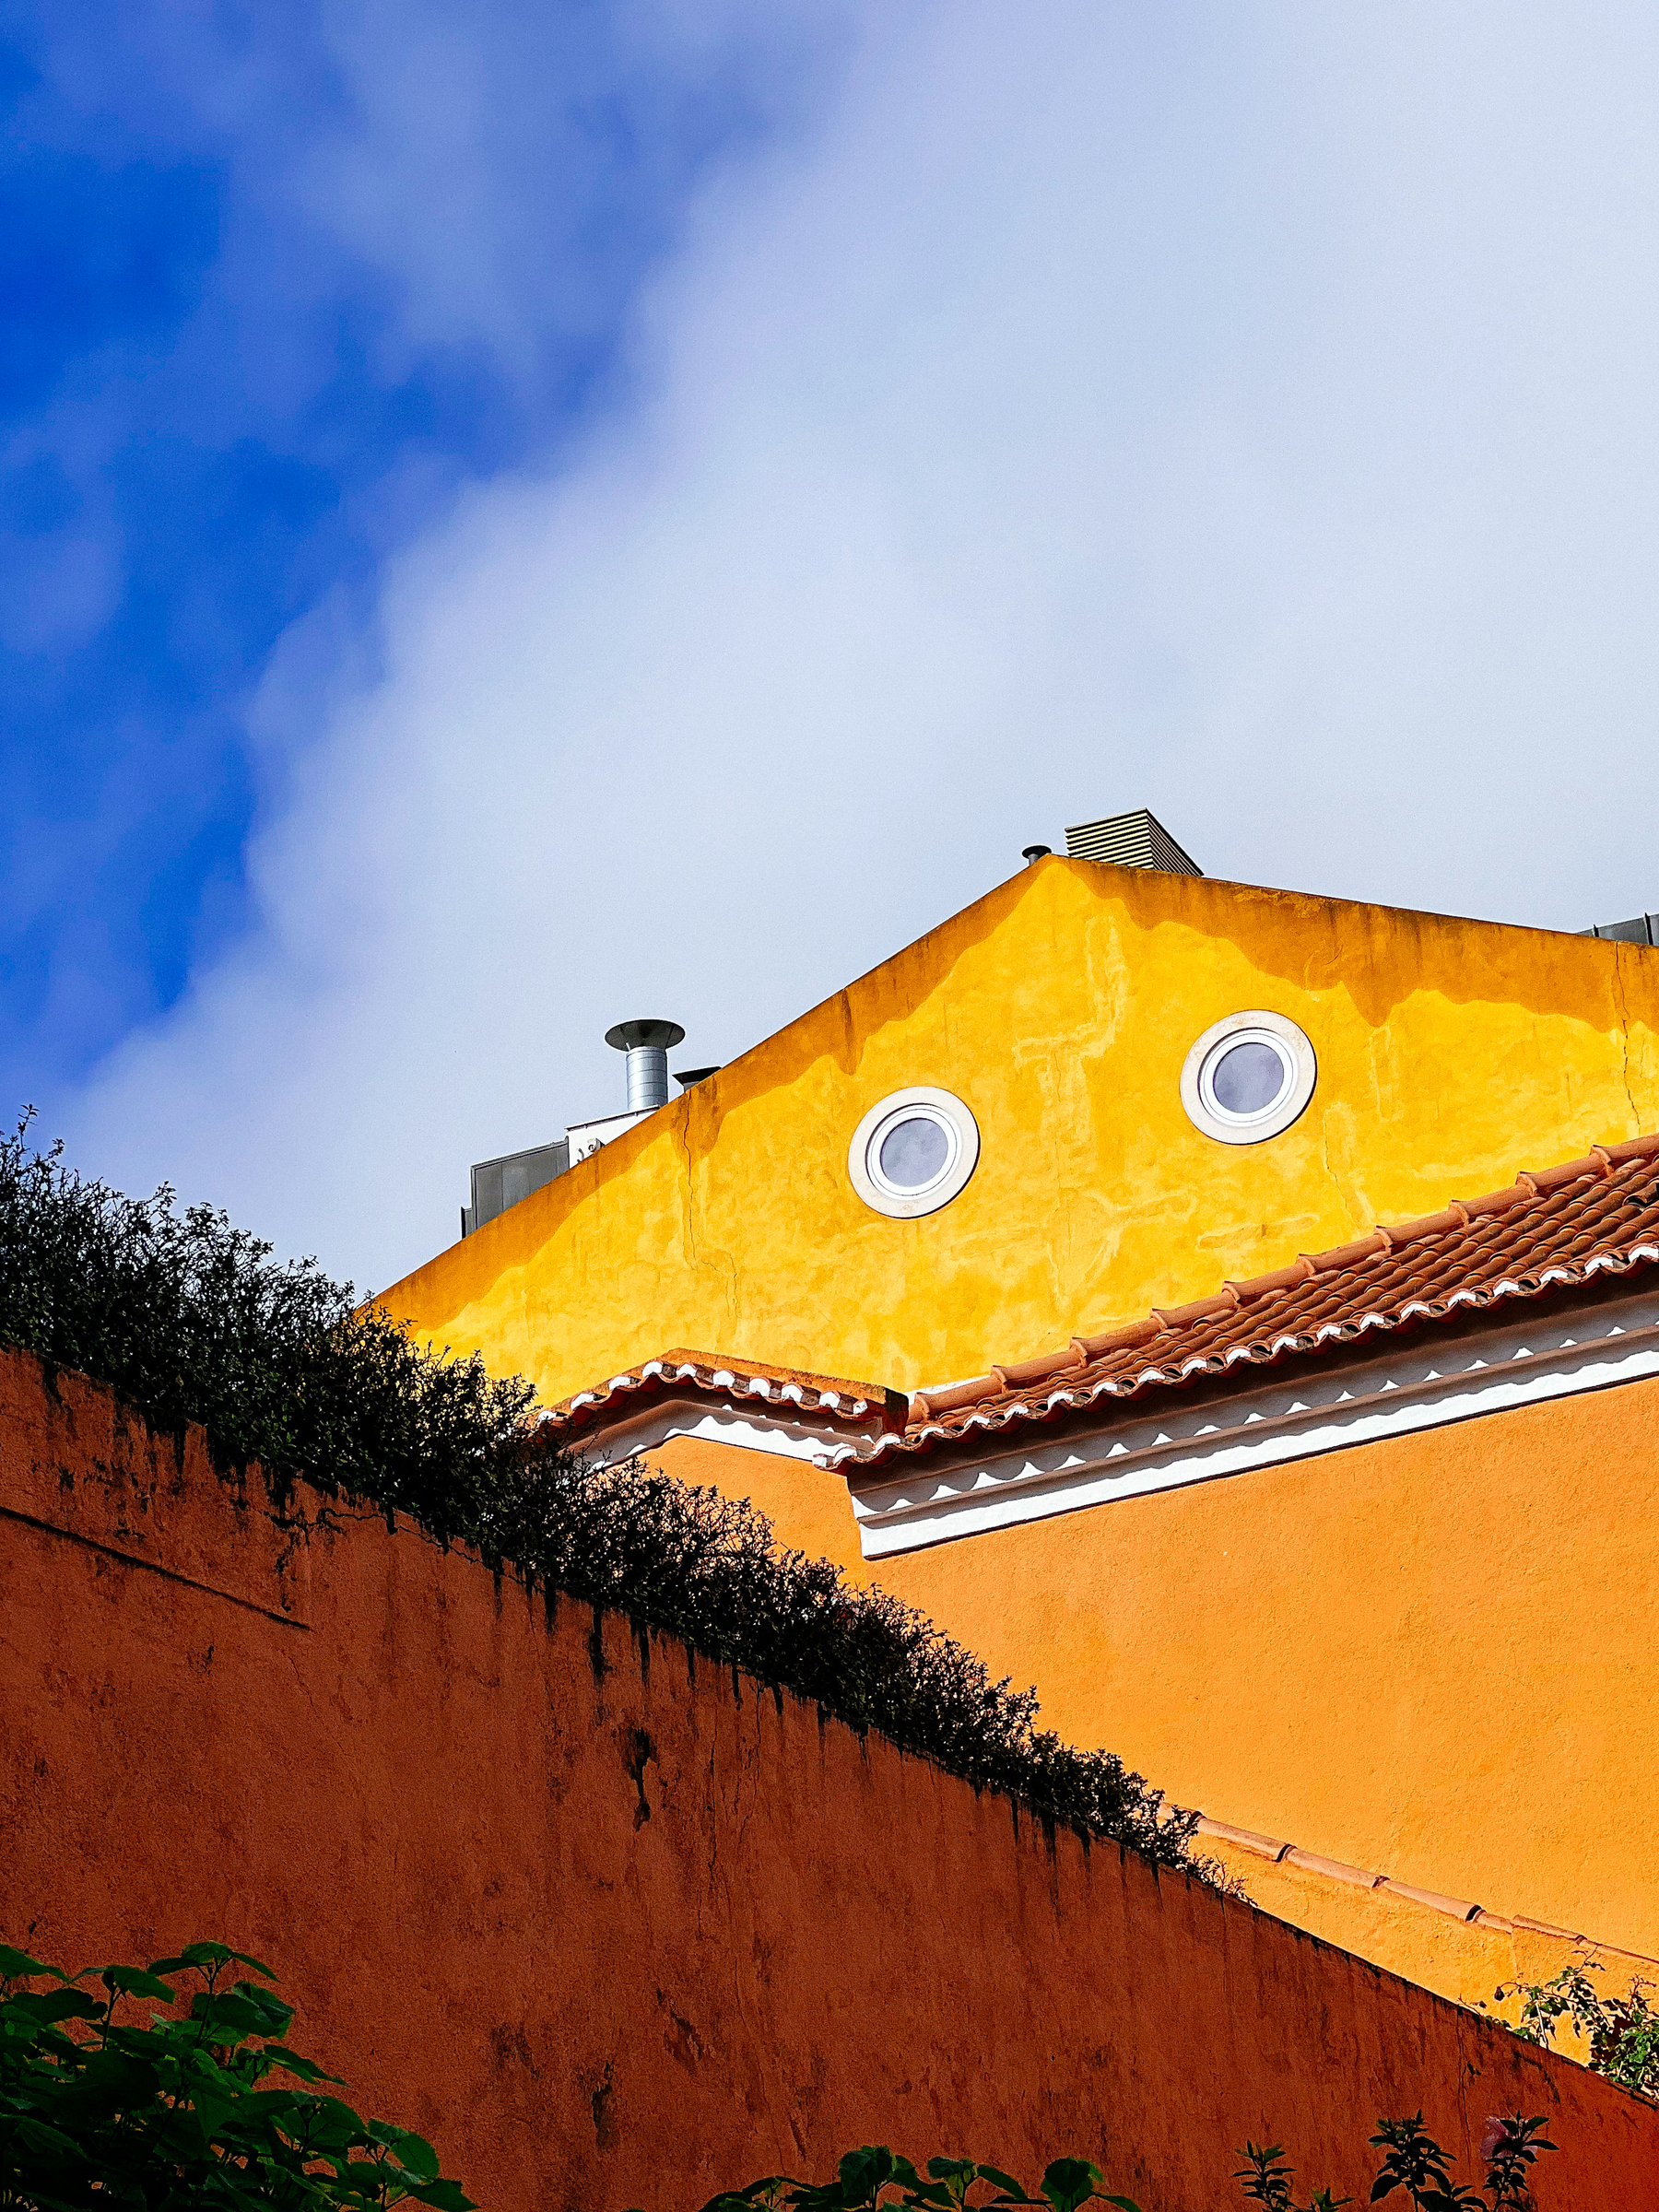 Eyes on the side of a yellow house. 